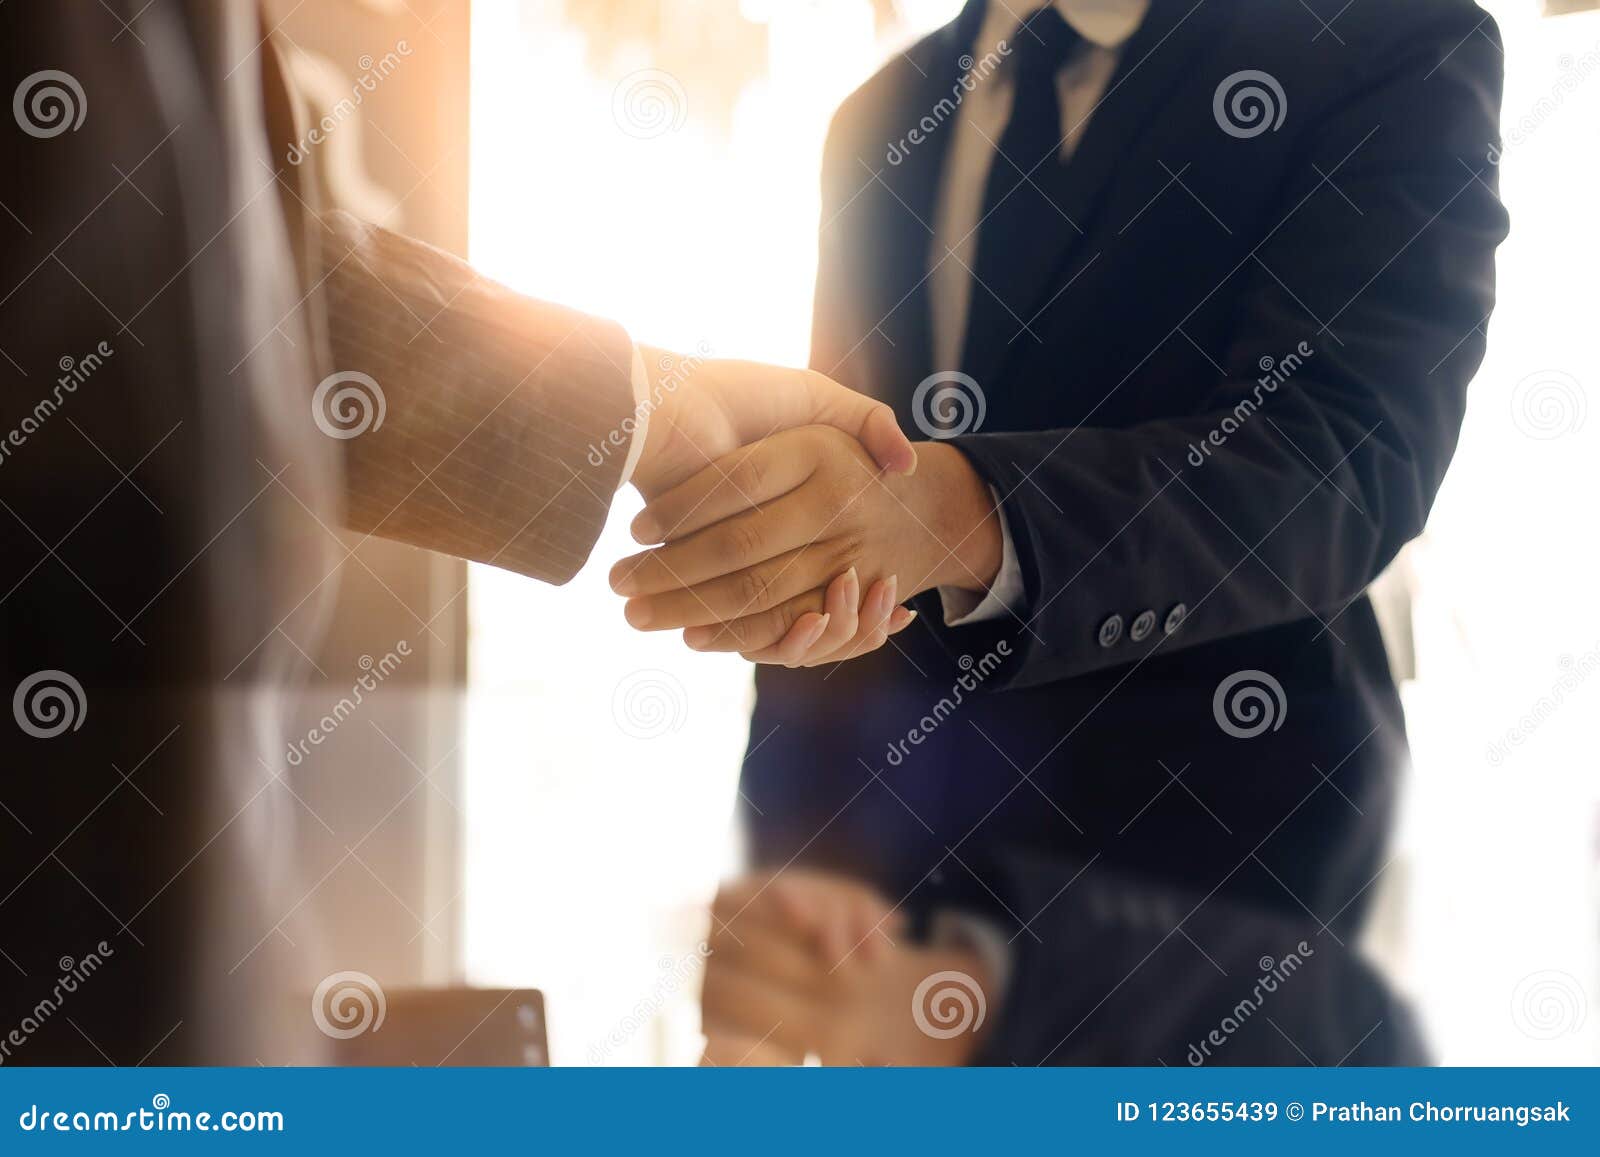 business partnership handshake concept.photo two coworkers hands